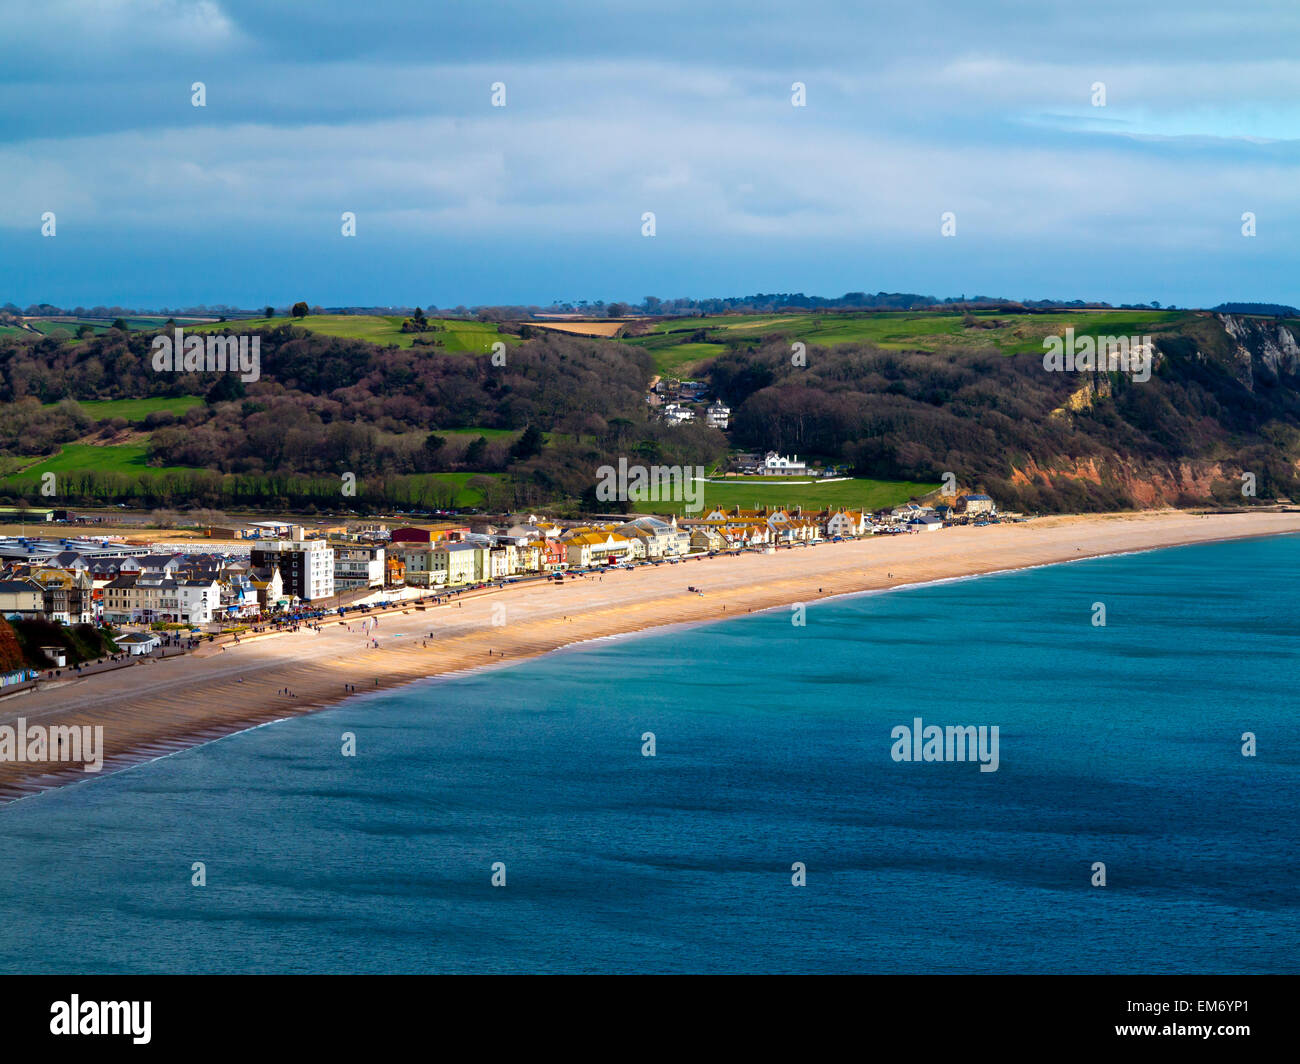 A view from the cliffs along the South West Coastal Path looking down on to the beach and seafront at Seaton Devon England UK Stock Photo